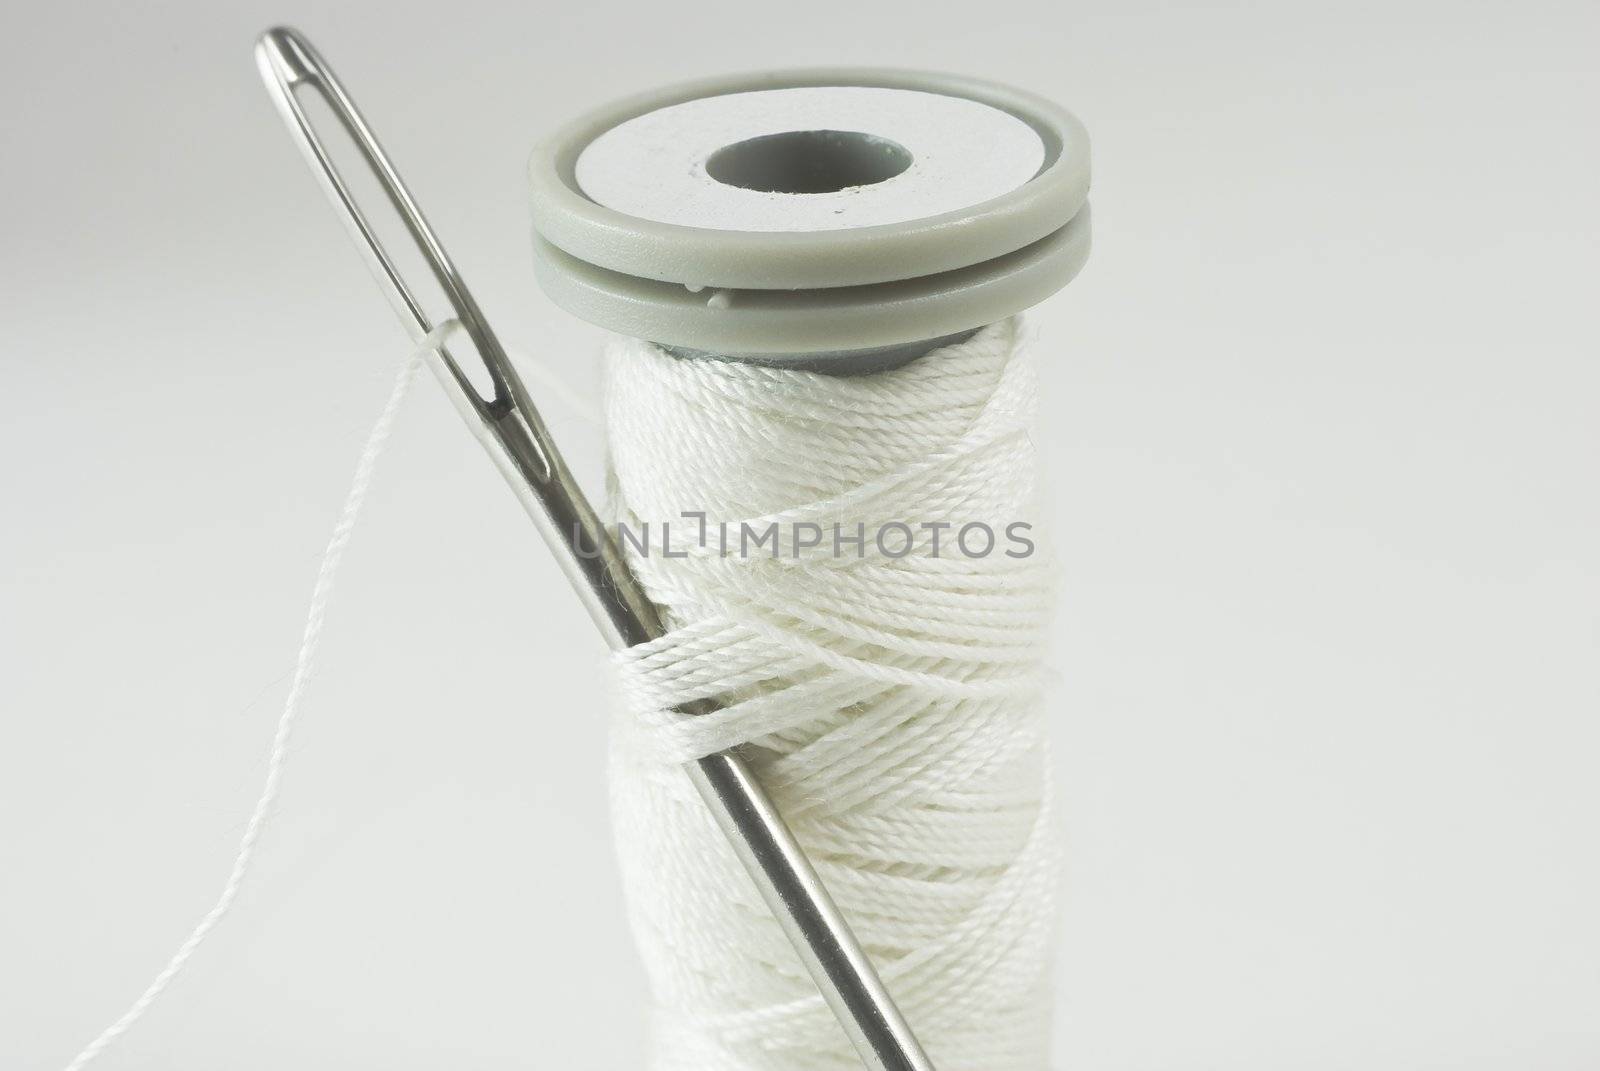 Sewing needle threaded with white cotton, inserted into thread on cotton reel.